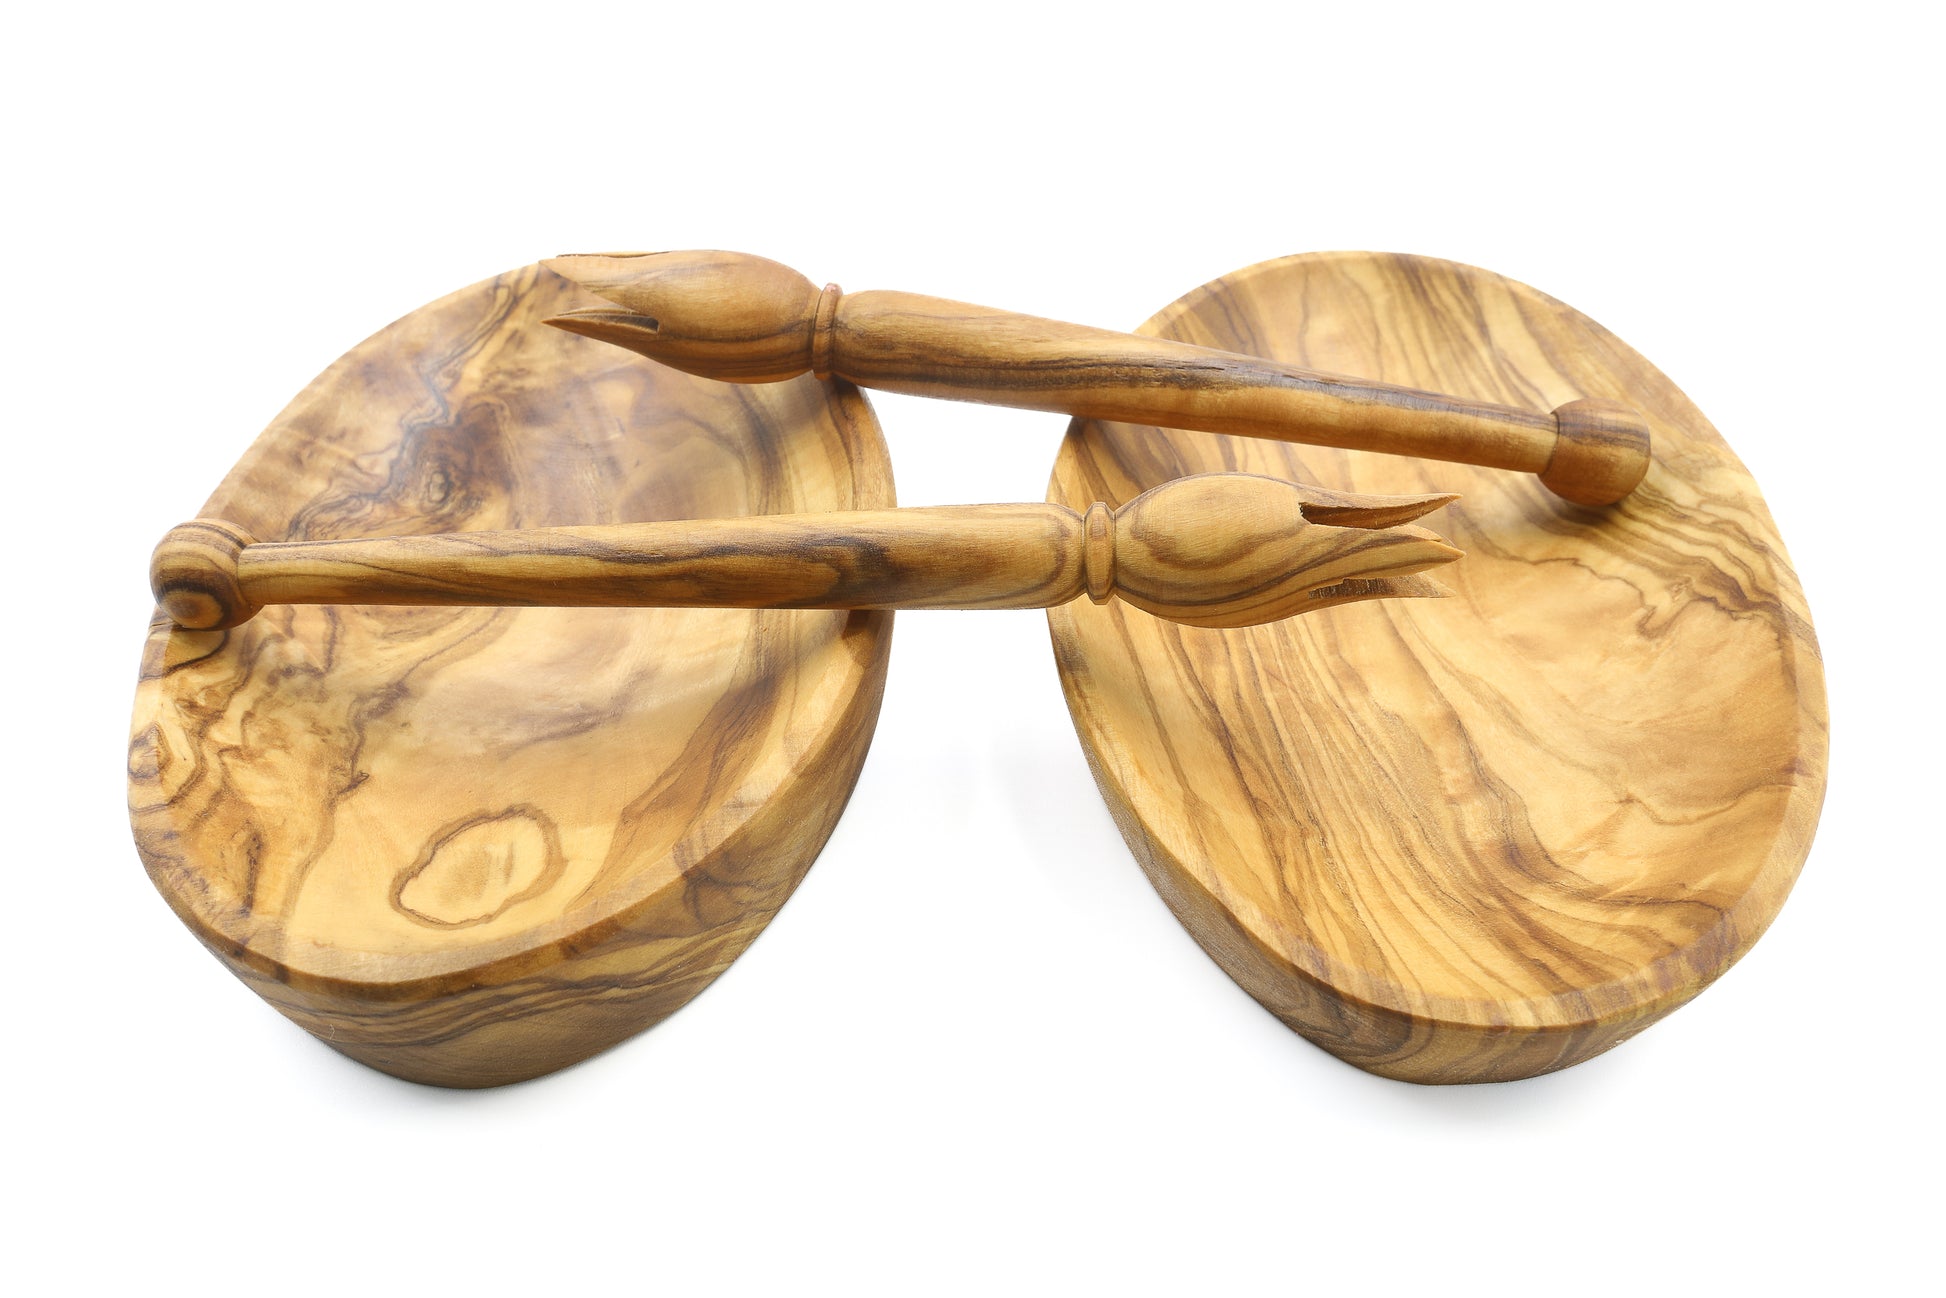 Handmade oval bowl and olive picker duo, showcasing the beauty of olive wood